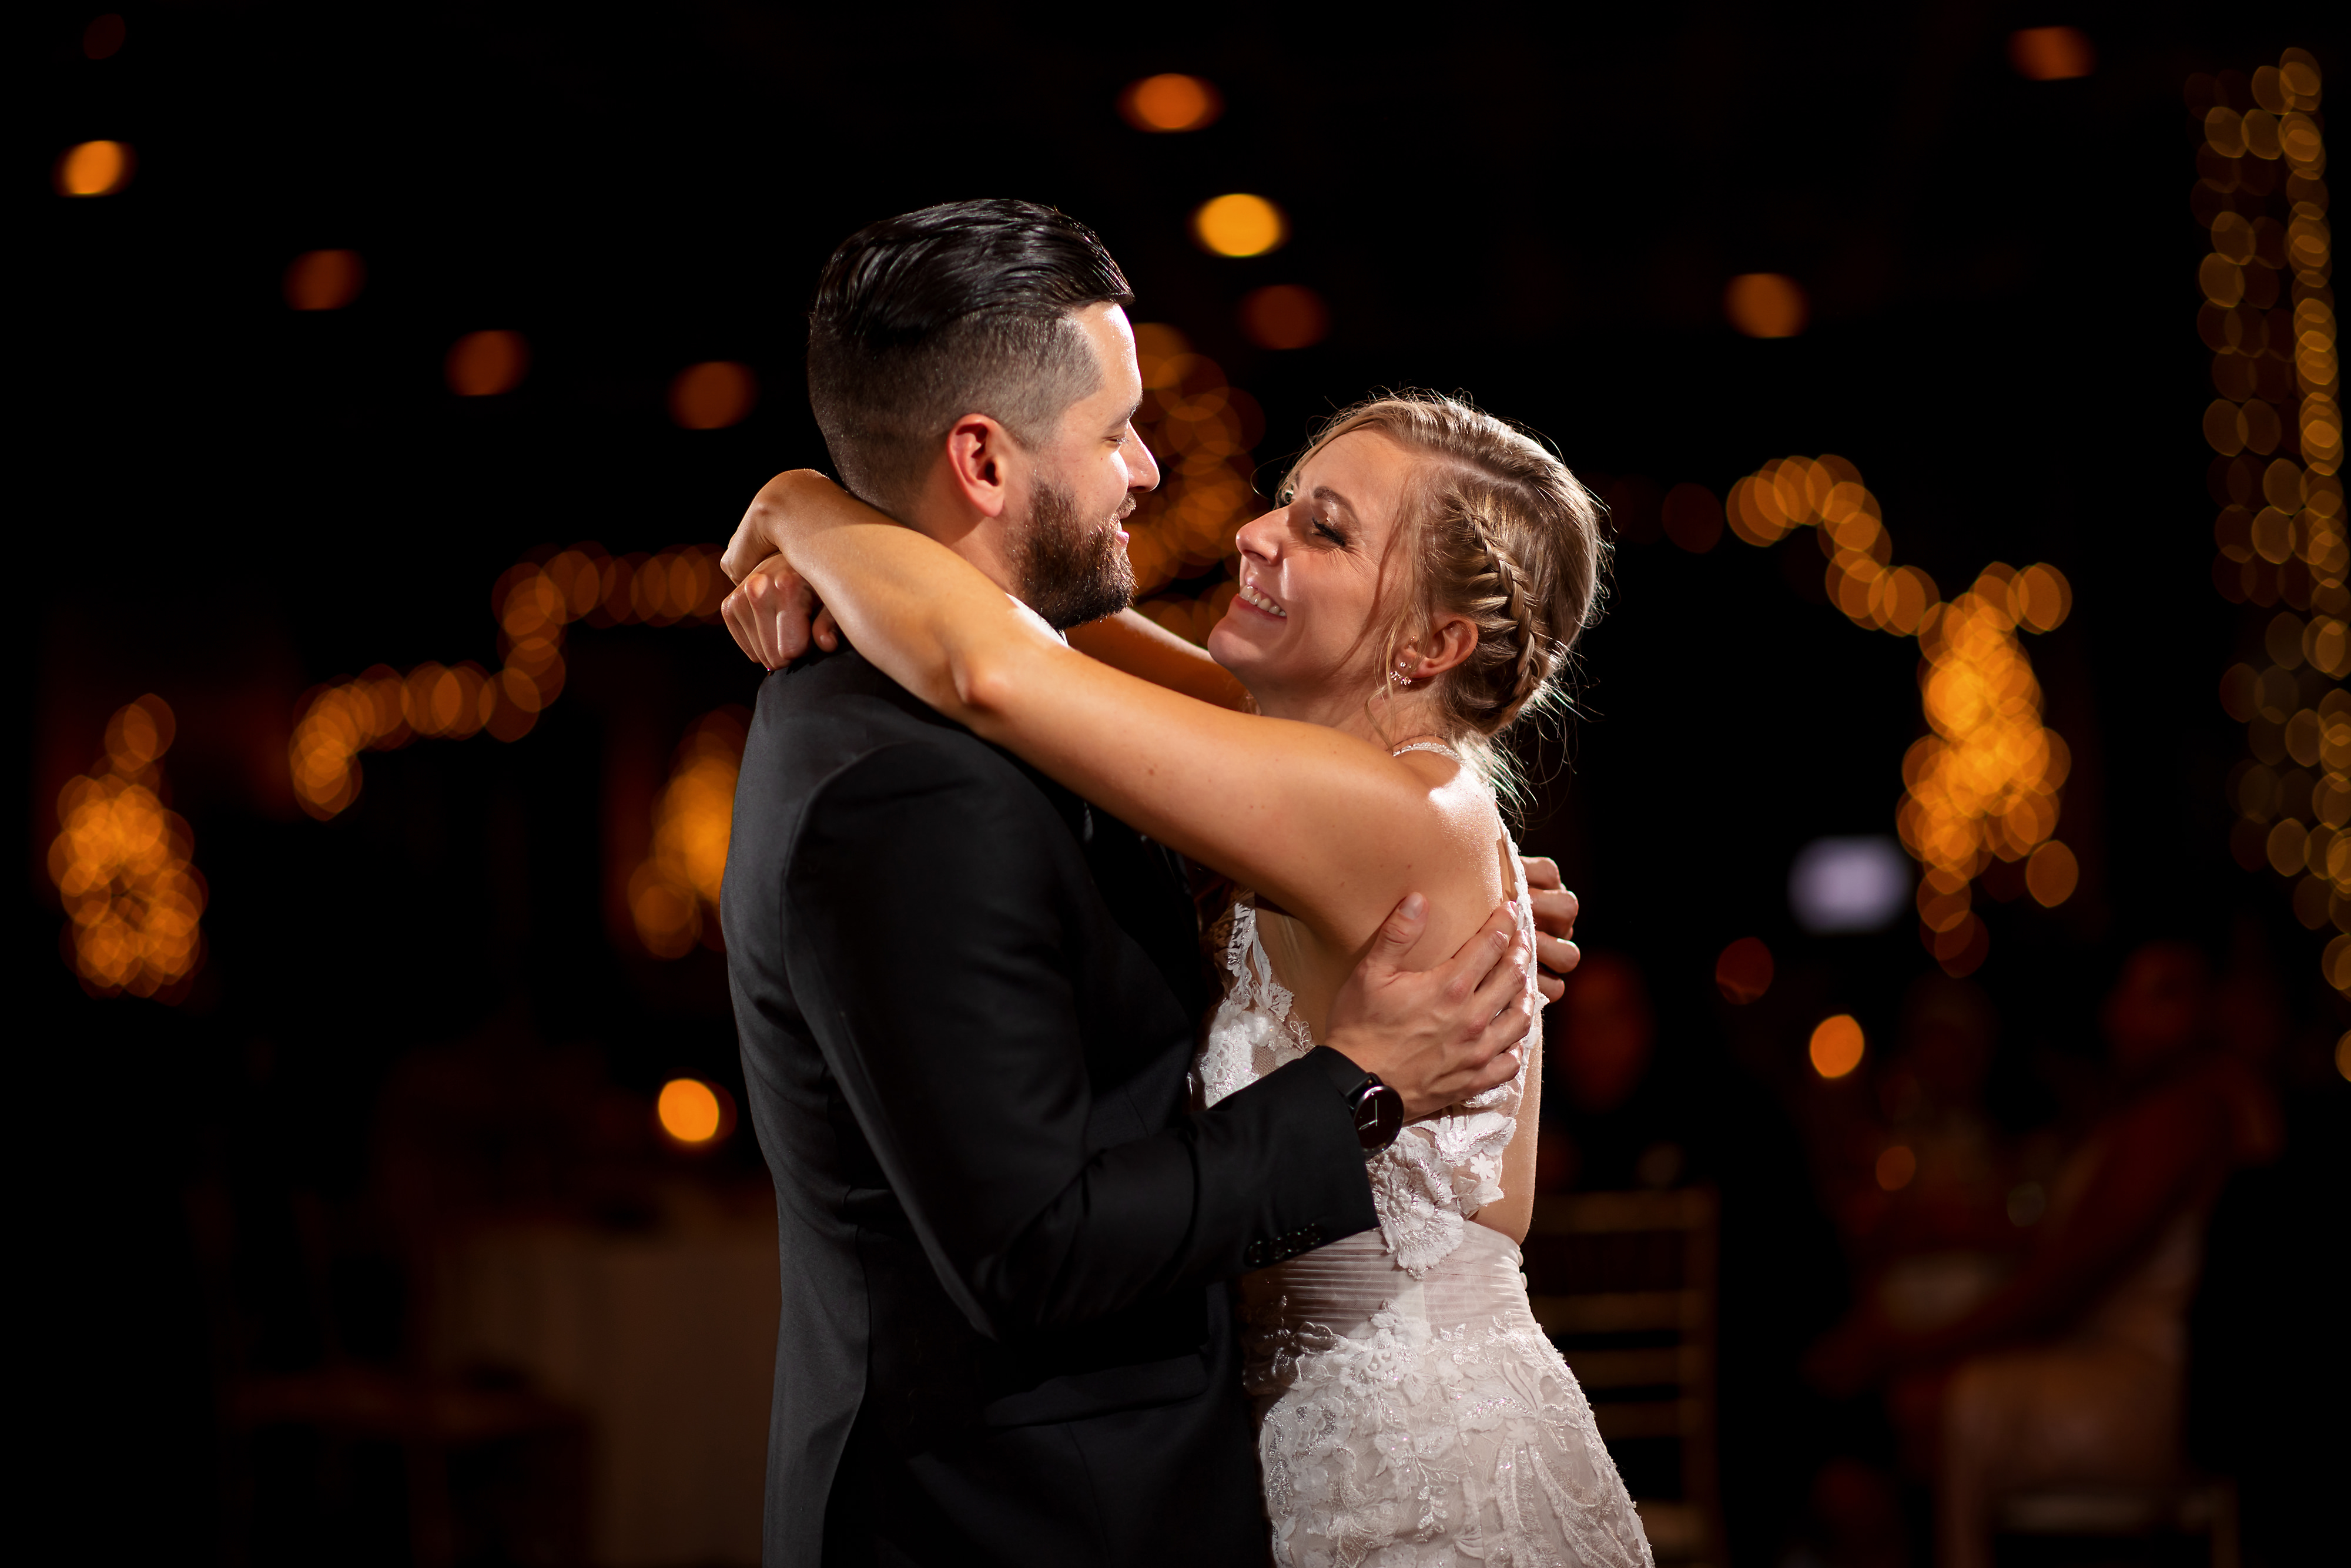 Bride and groom dance together during wedding reception at Two Brothers Brewery in Aurora, Illinois